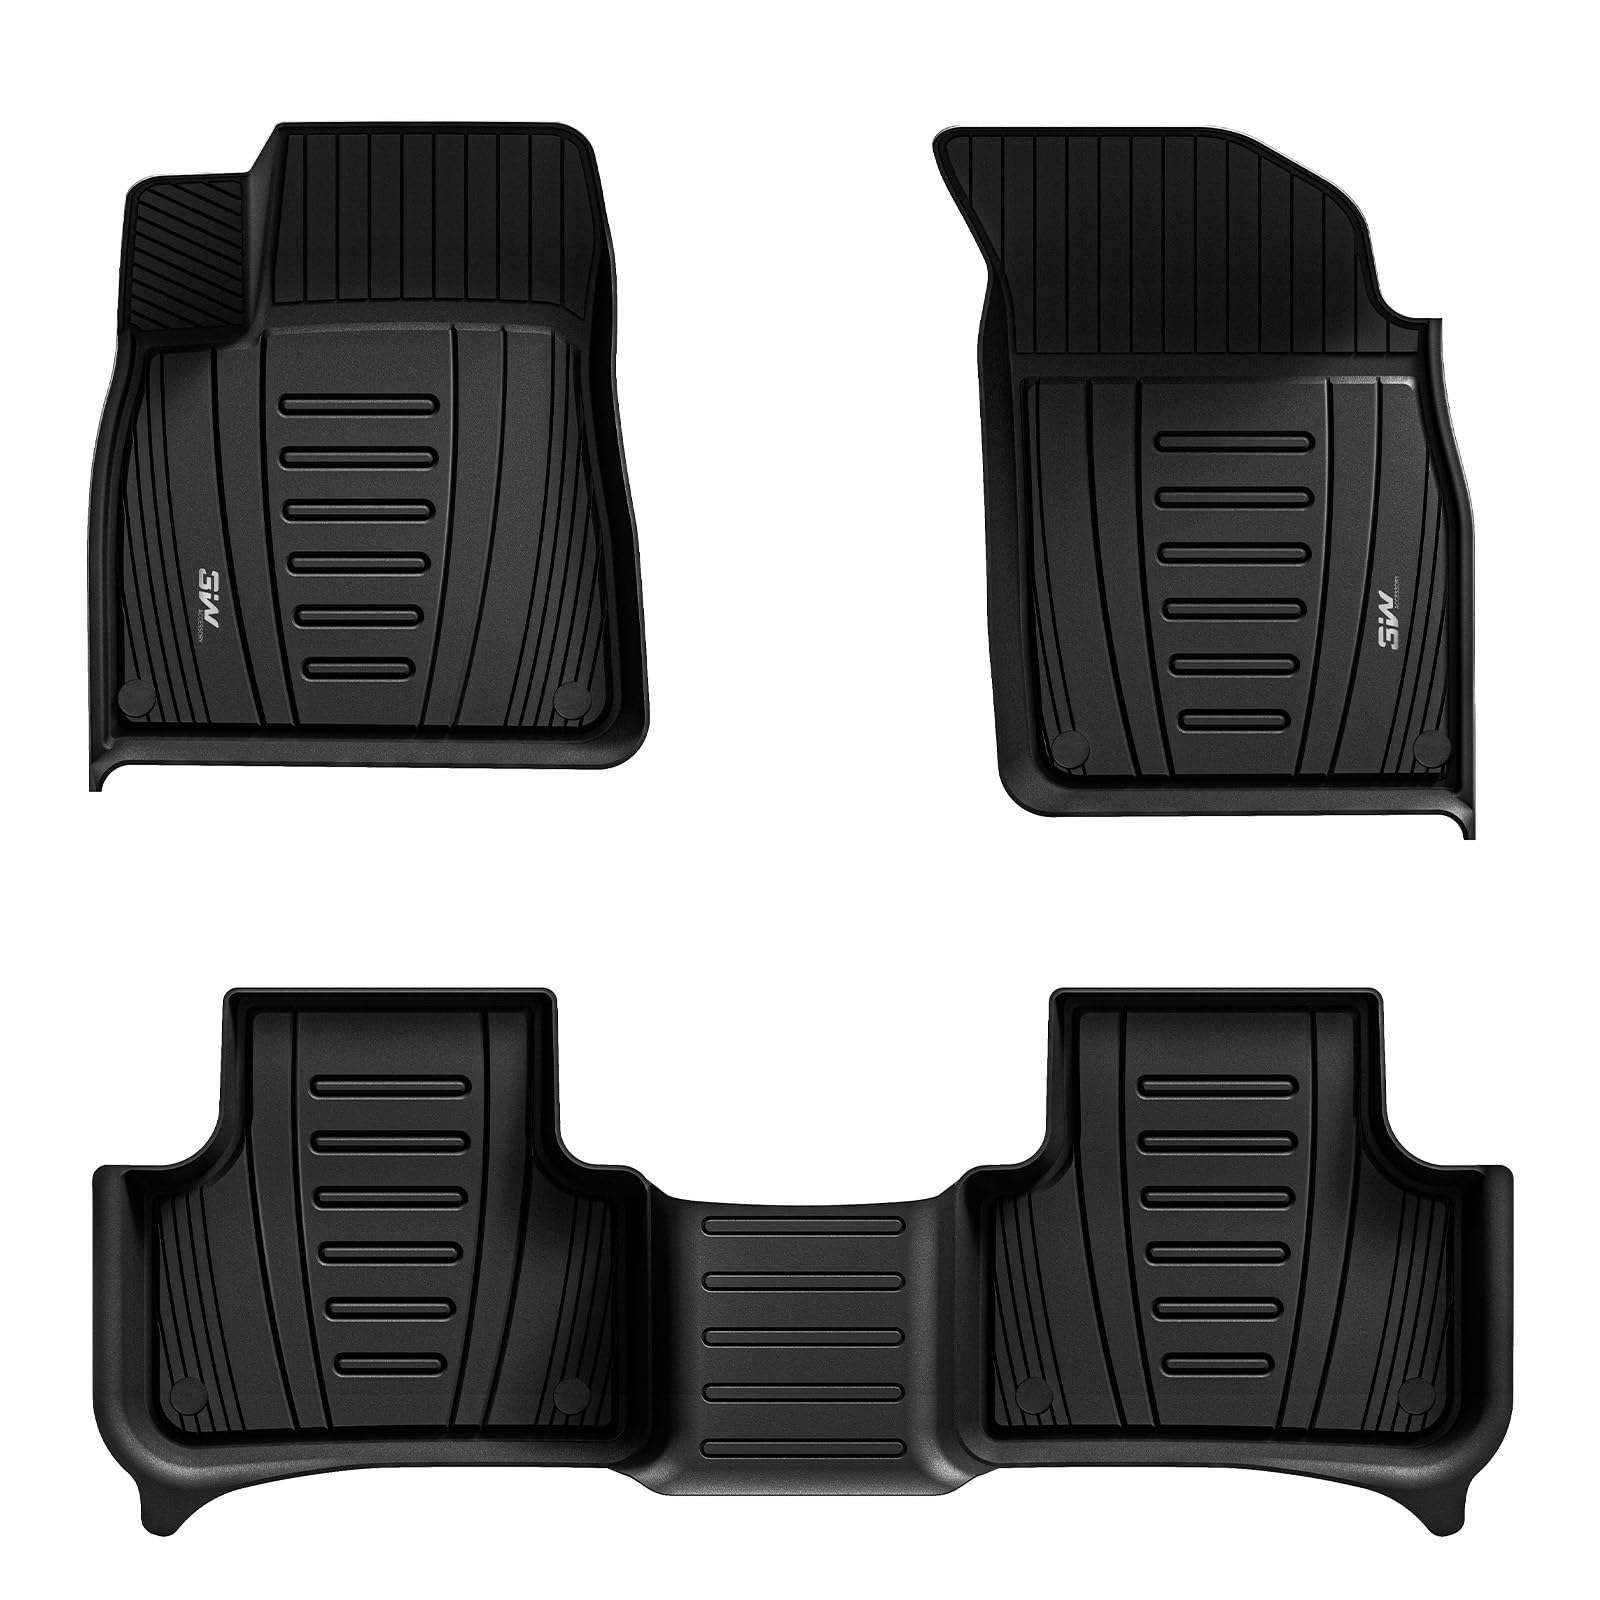 3W Audi Q8 2019-2024 Custom Floor Mats TPE Material & All-Weather Protection Vehicles & Parts 3Wliners 2019-2024 Q8 2019-2024 1st&2nd Row Mats